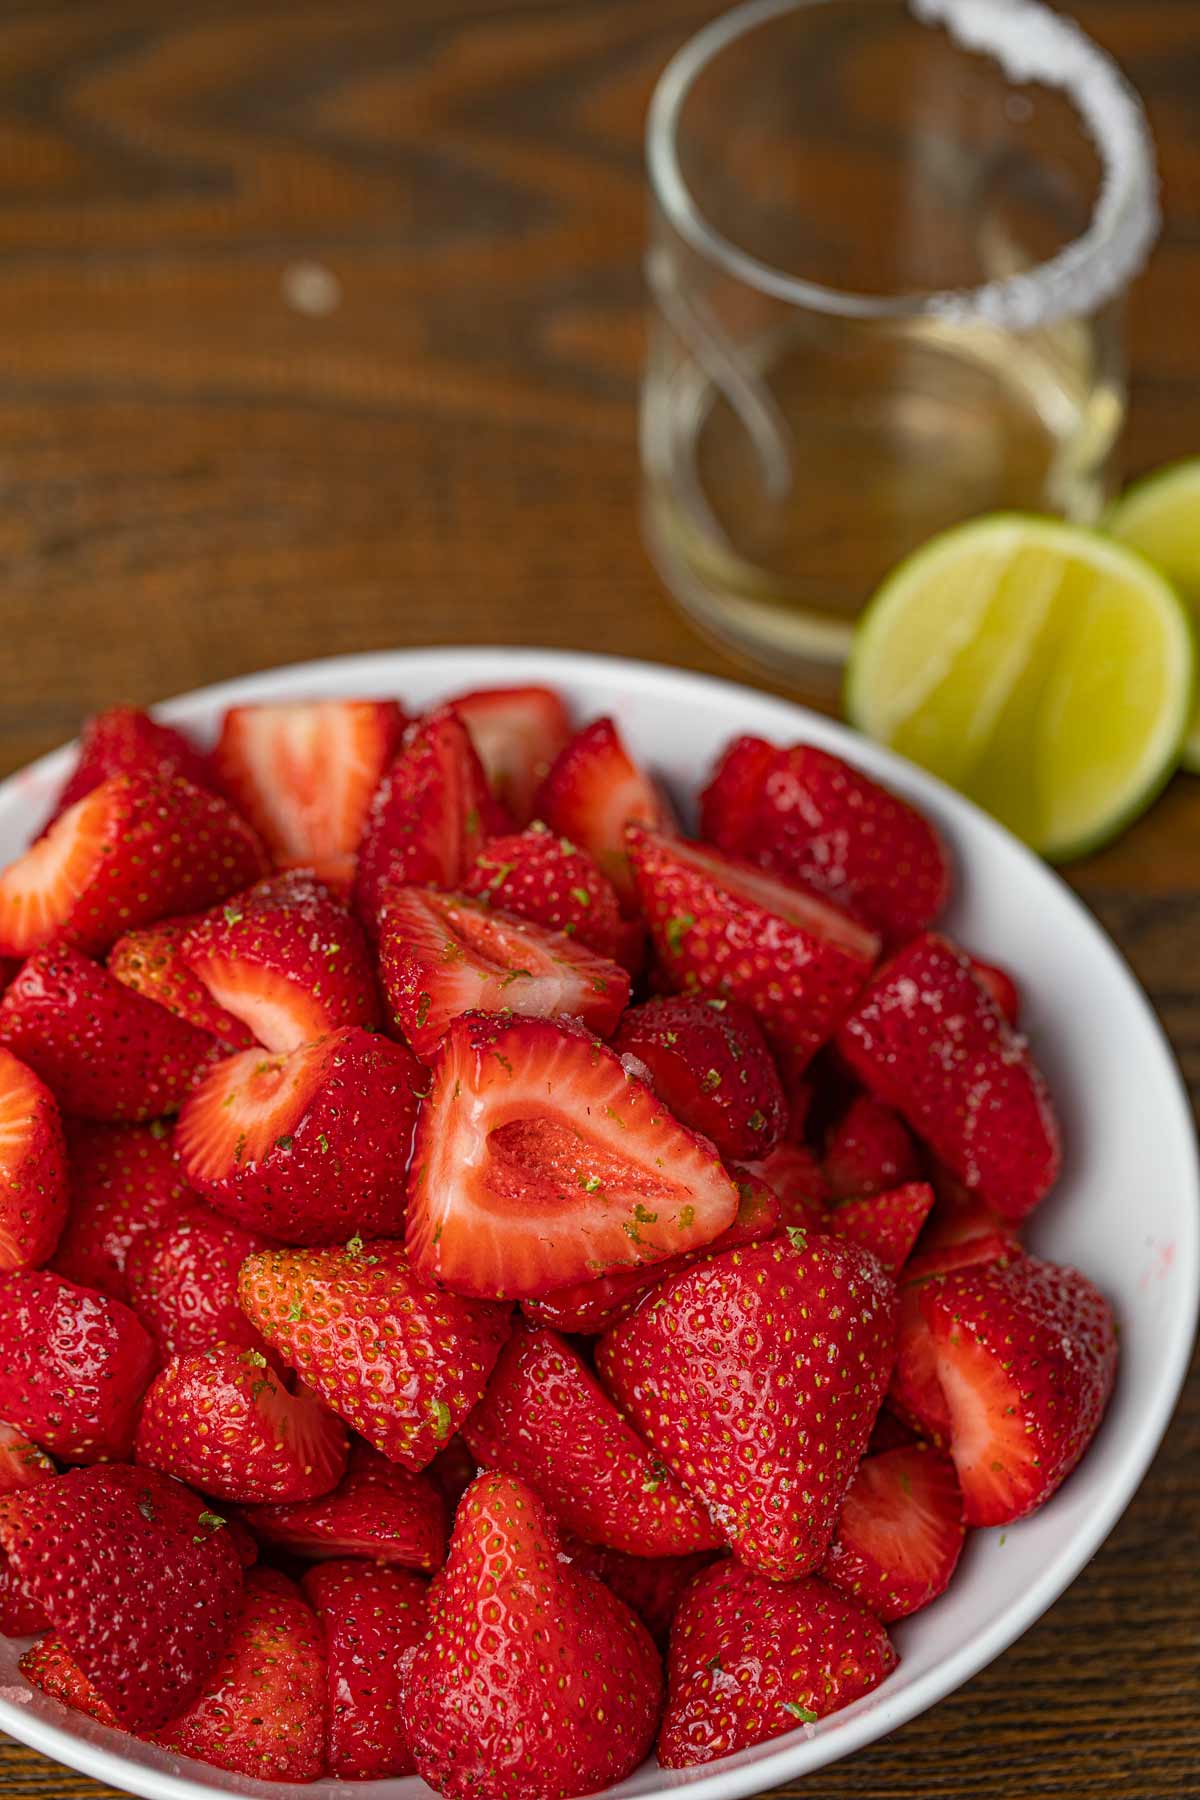 https://cookingmadehealthy.com/wp-content/uploads/2019/07/Tequila-Lime-Strawberries-CMH.jpg